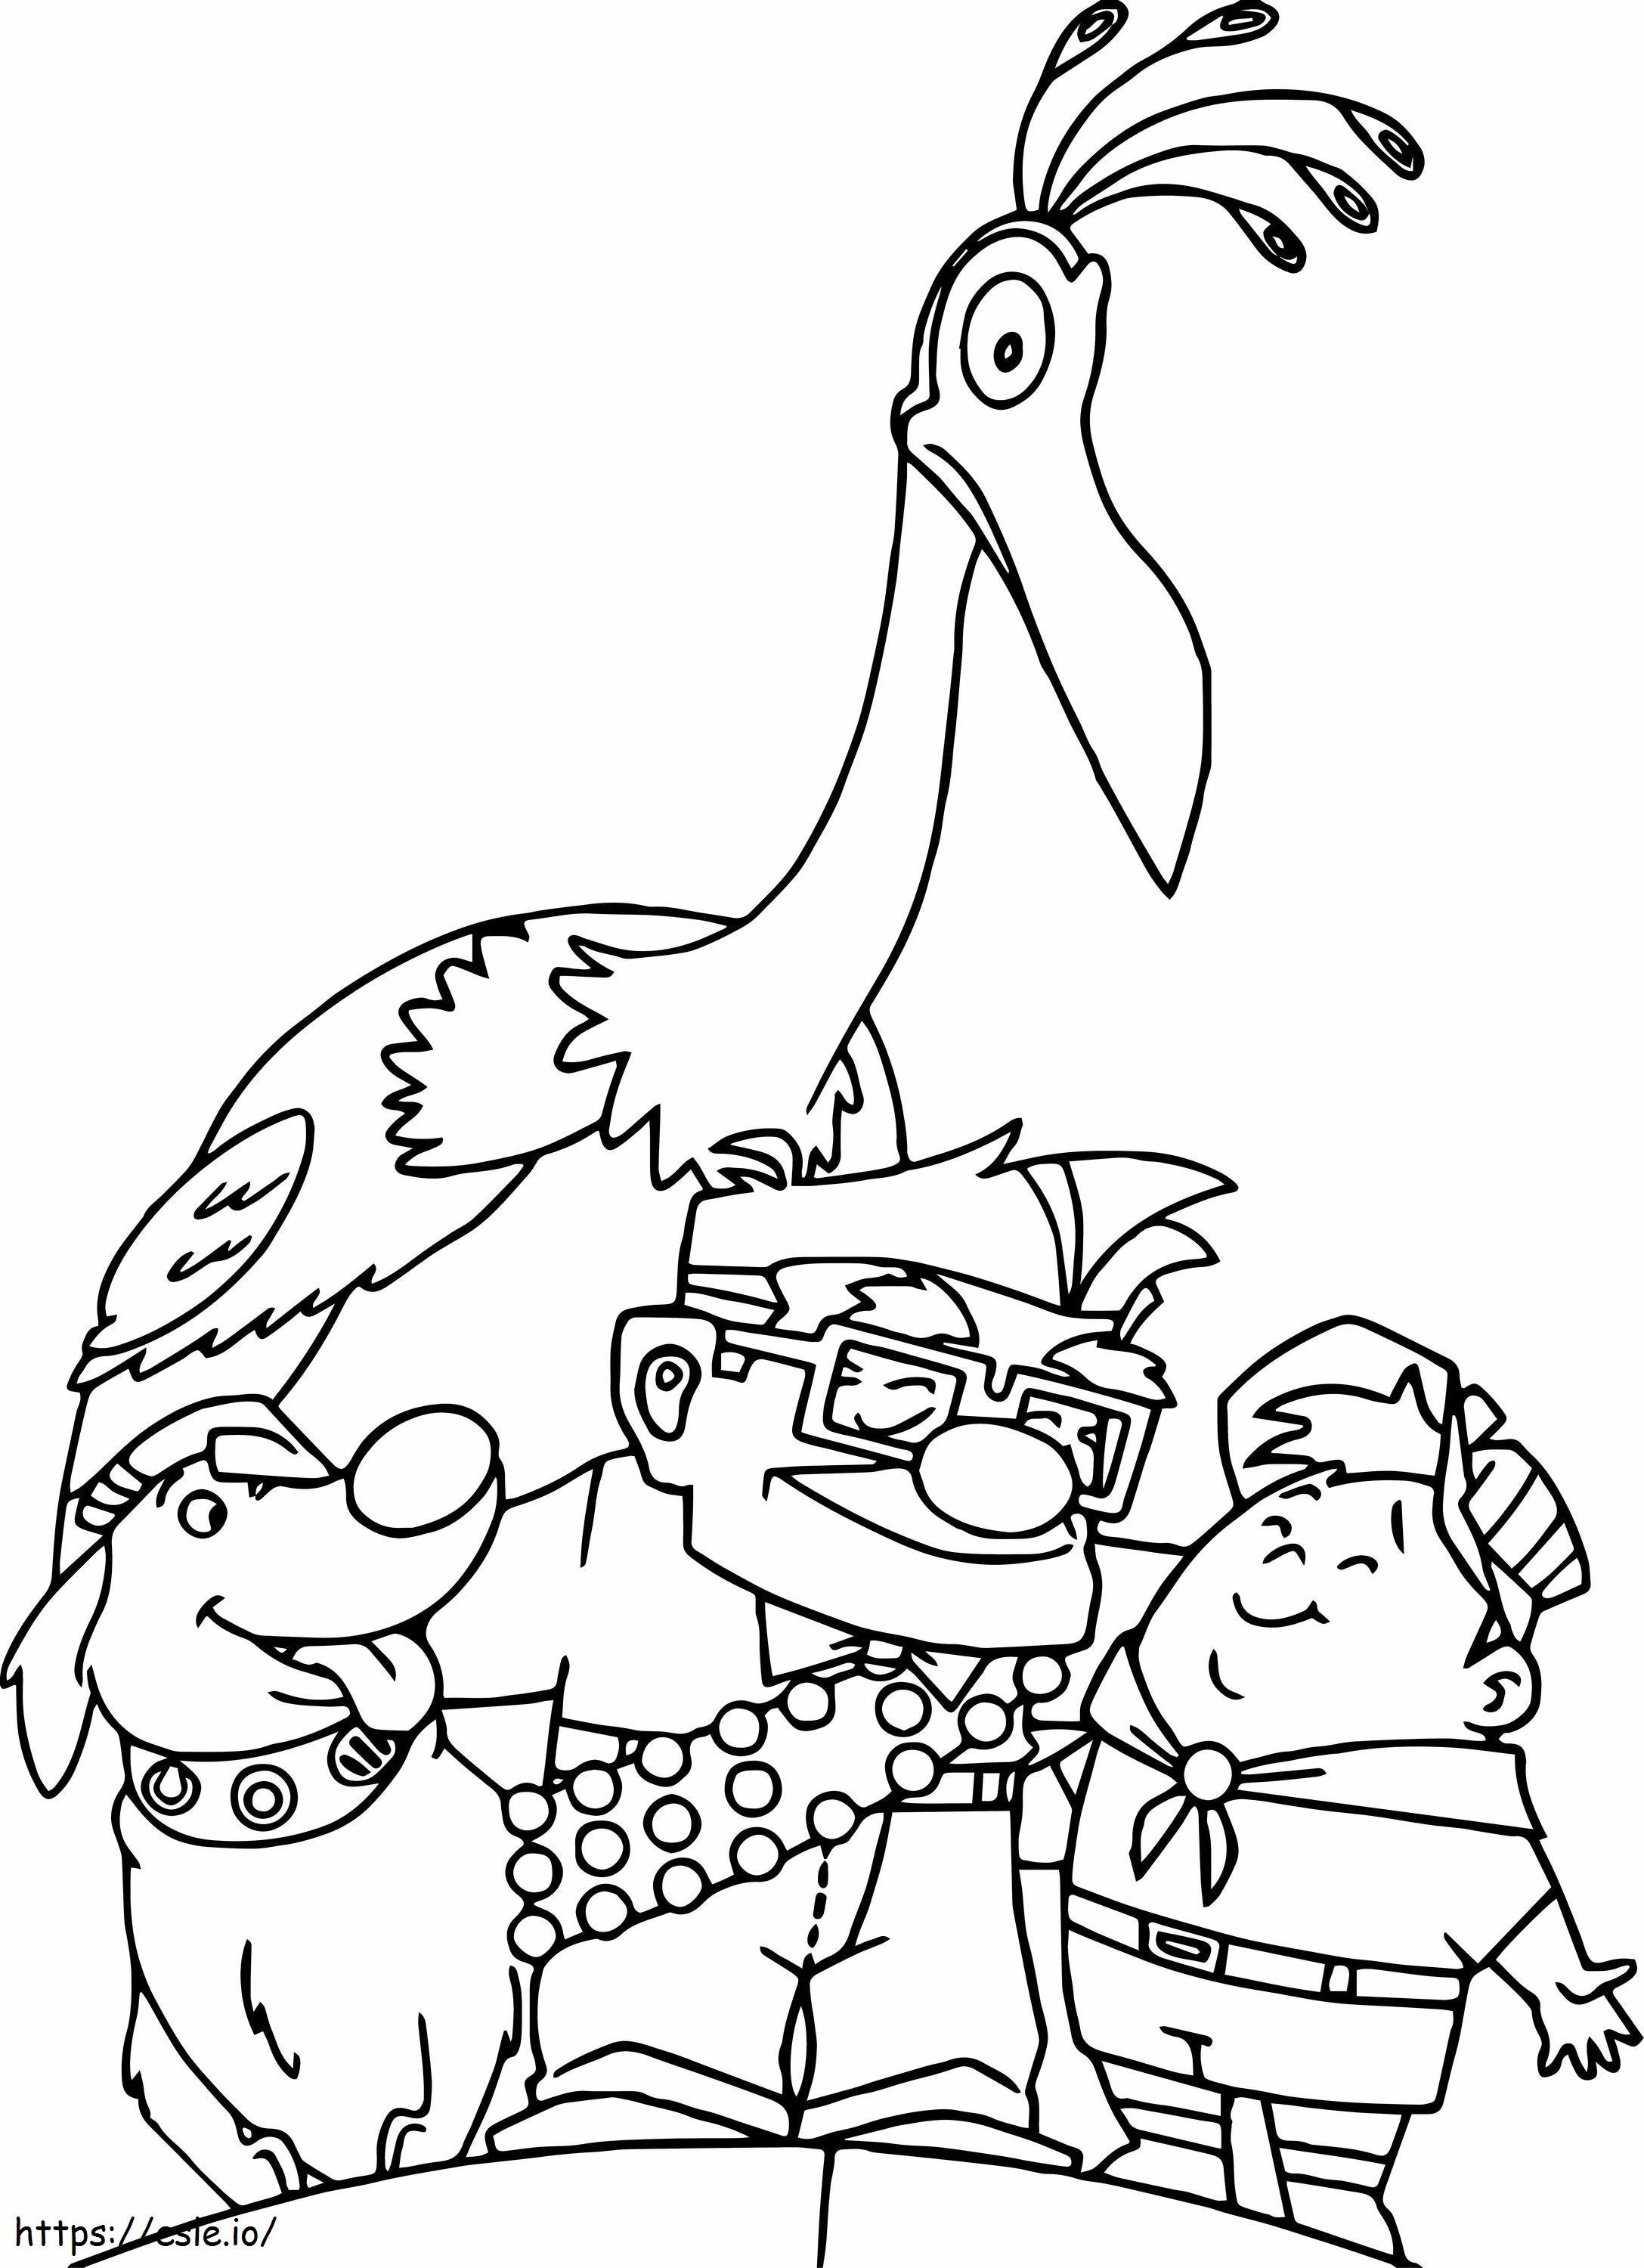 Coloriage _Happy Family In Up A4 Scaled à imprimer dessin